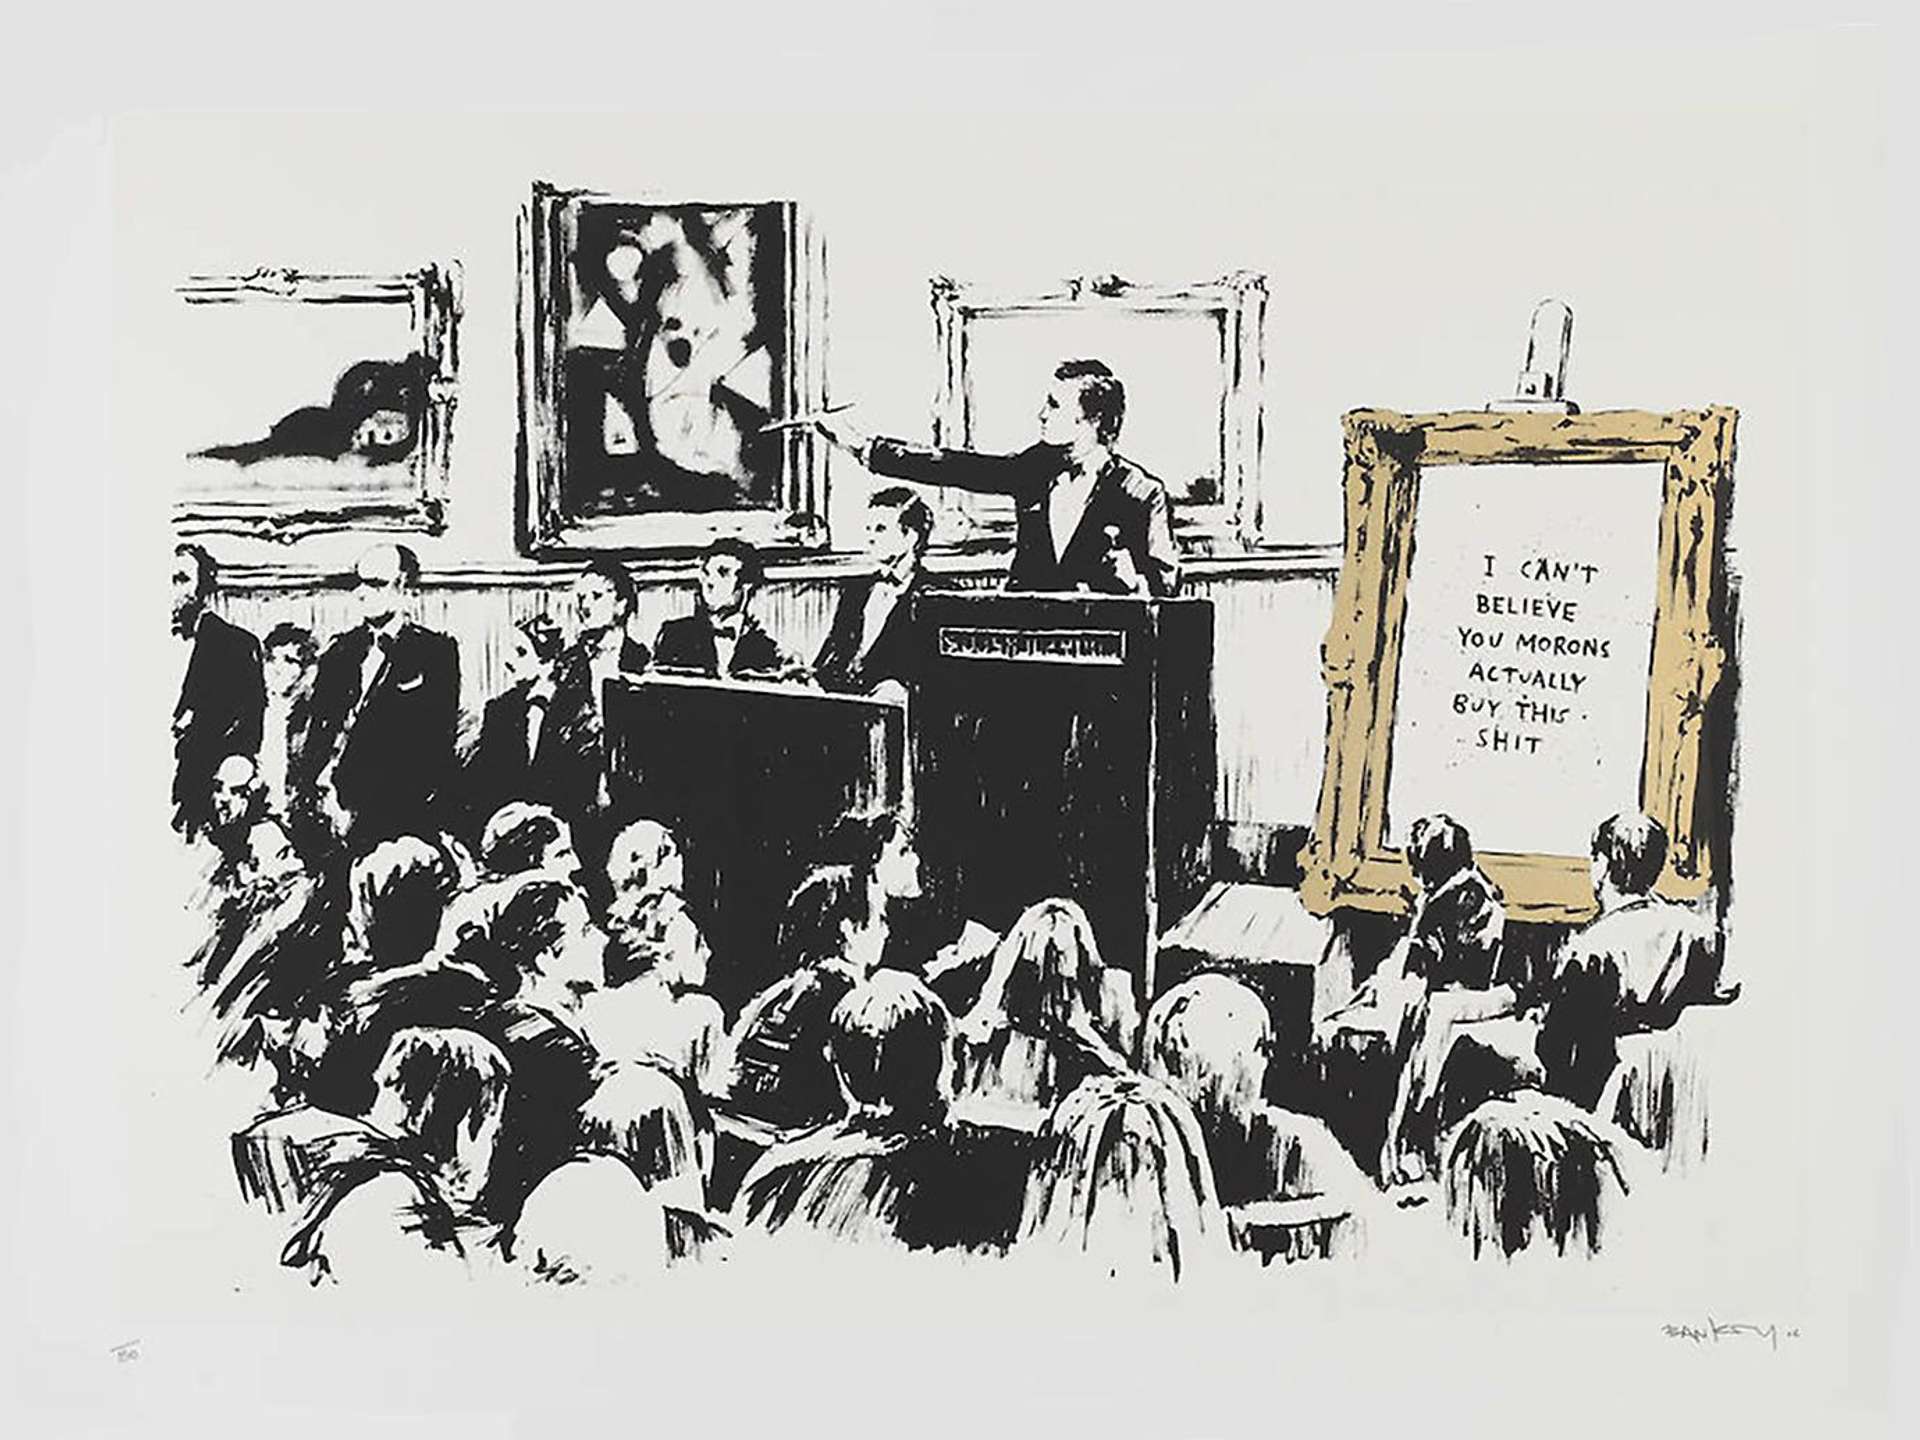 A representation of an auction house, with a framed artwork containing the words: “I CAN'T BELIEVE YOU MORONS BUY THIS SHIT”.